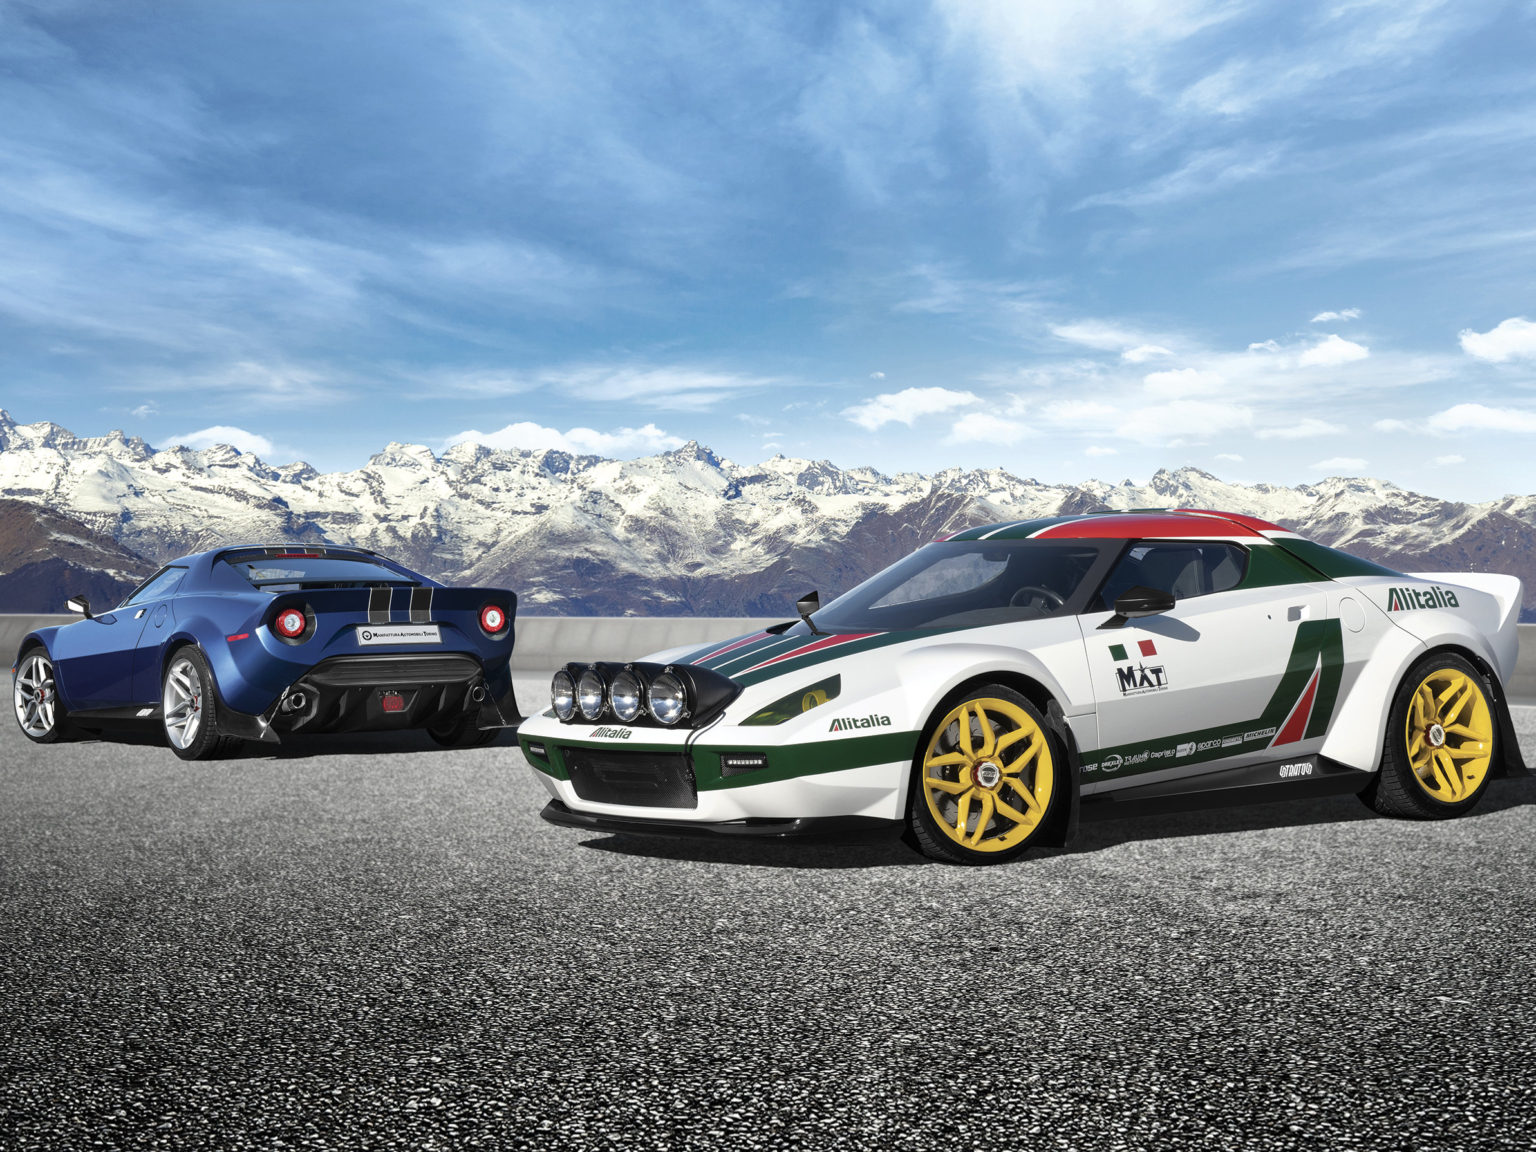 MAT is bringing classic rally design to its Stratos supercar.